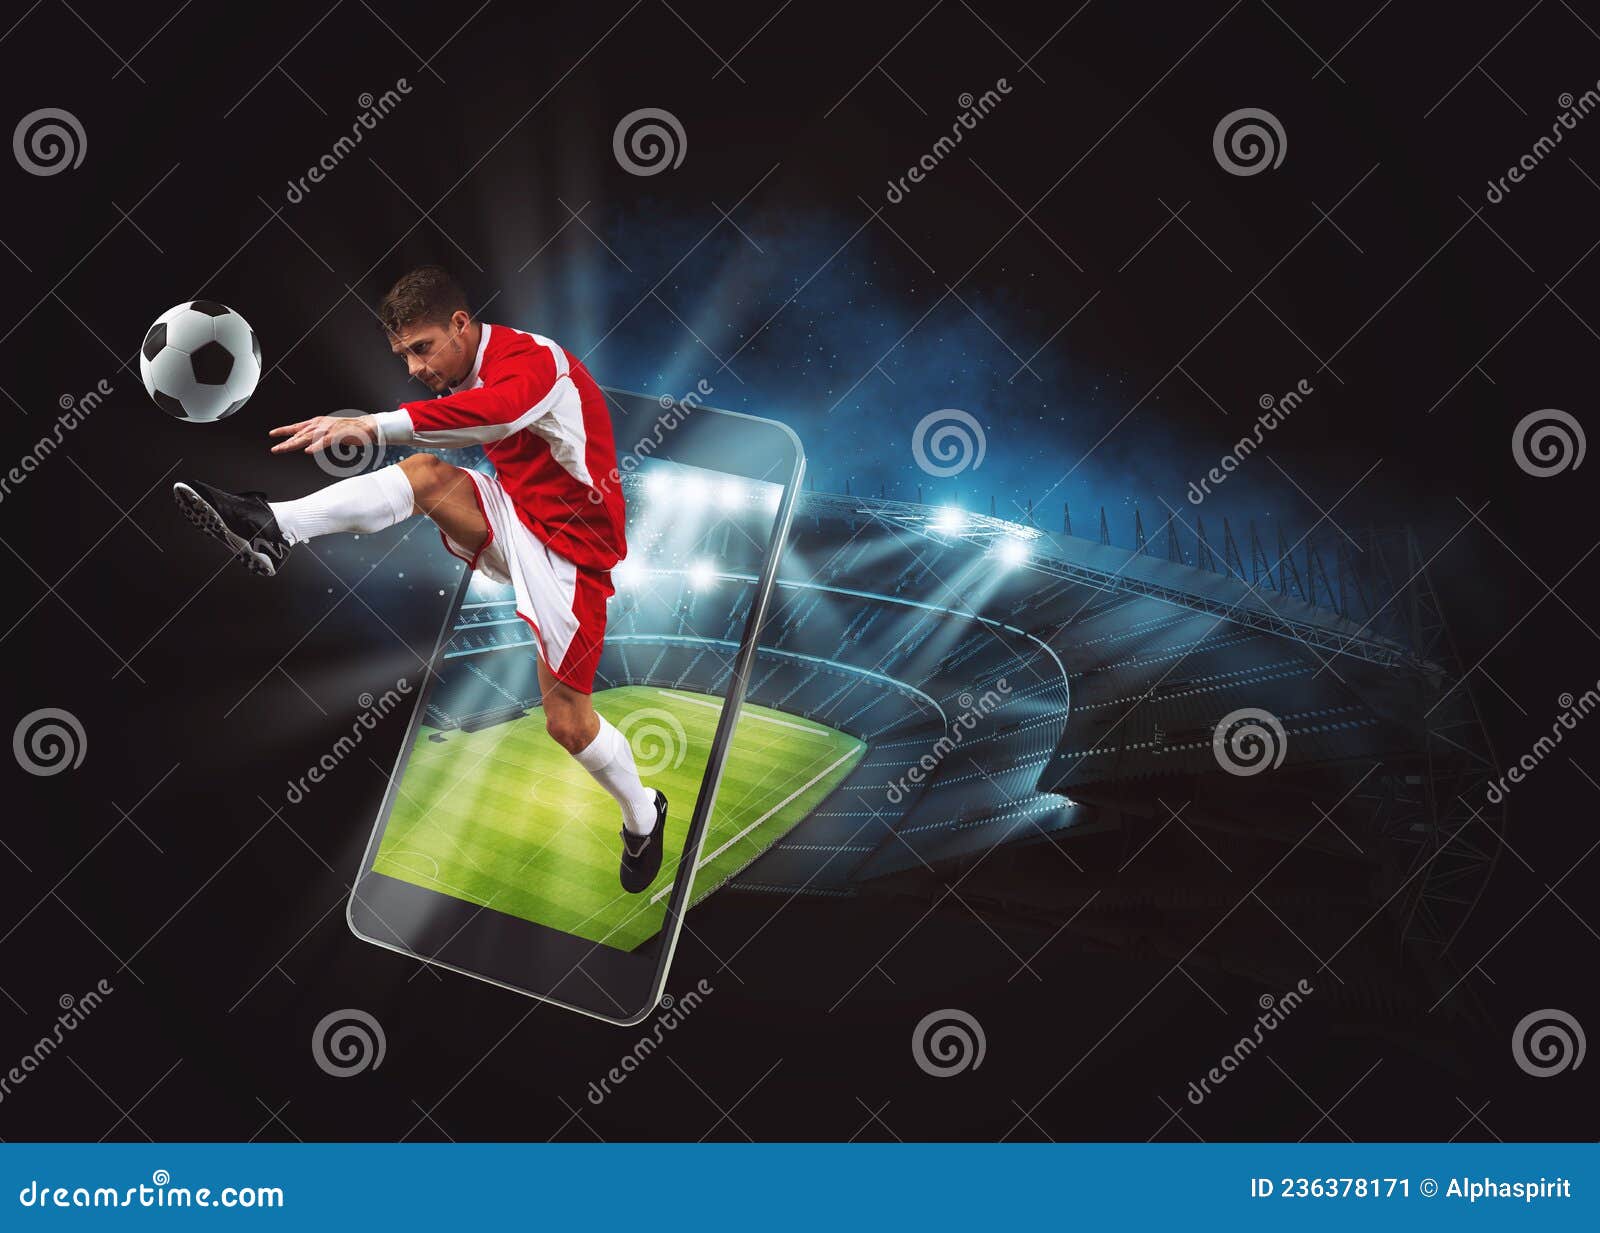 Watch a Live Sports Event on Your Mobile Device